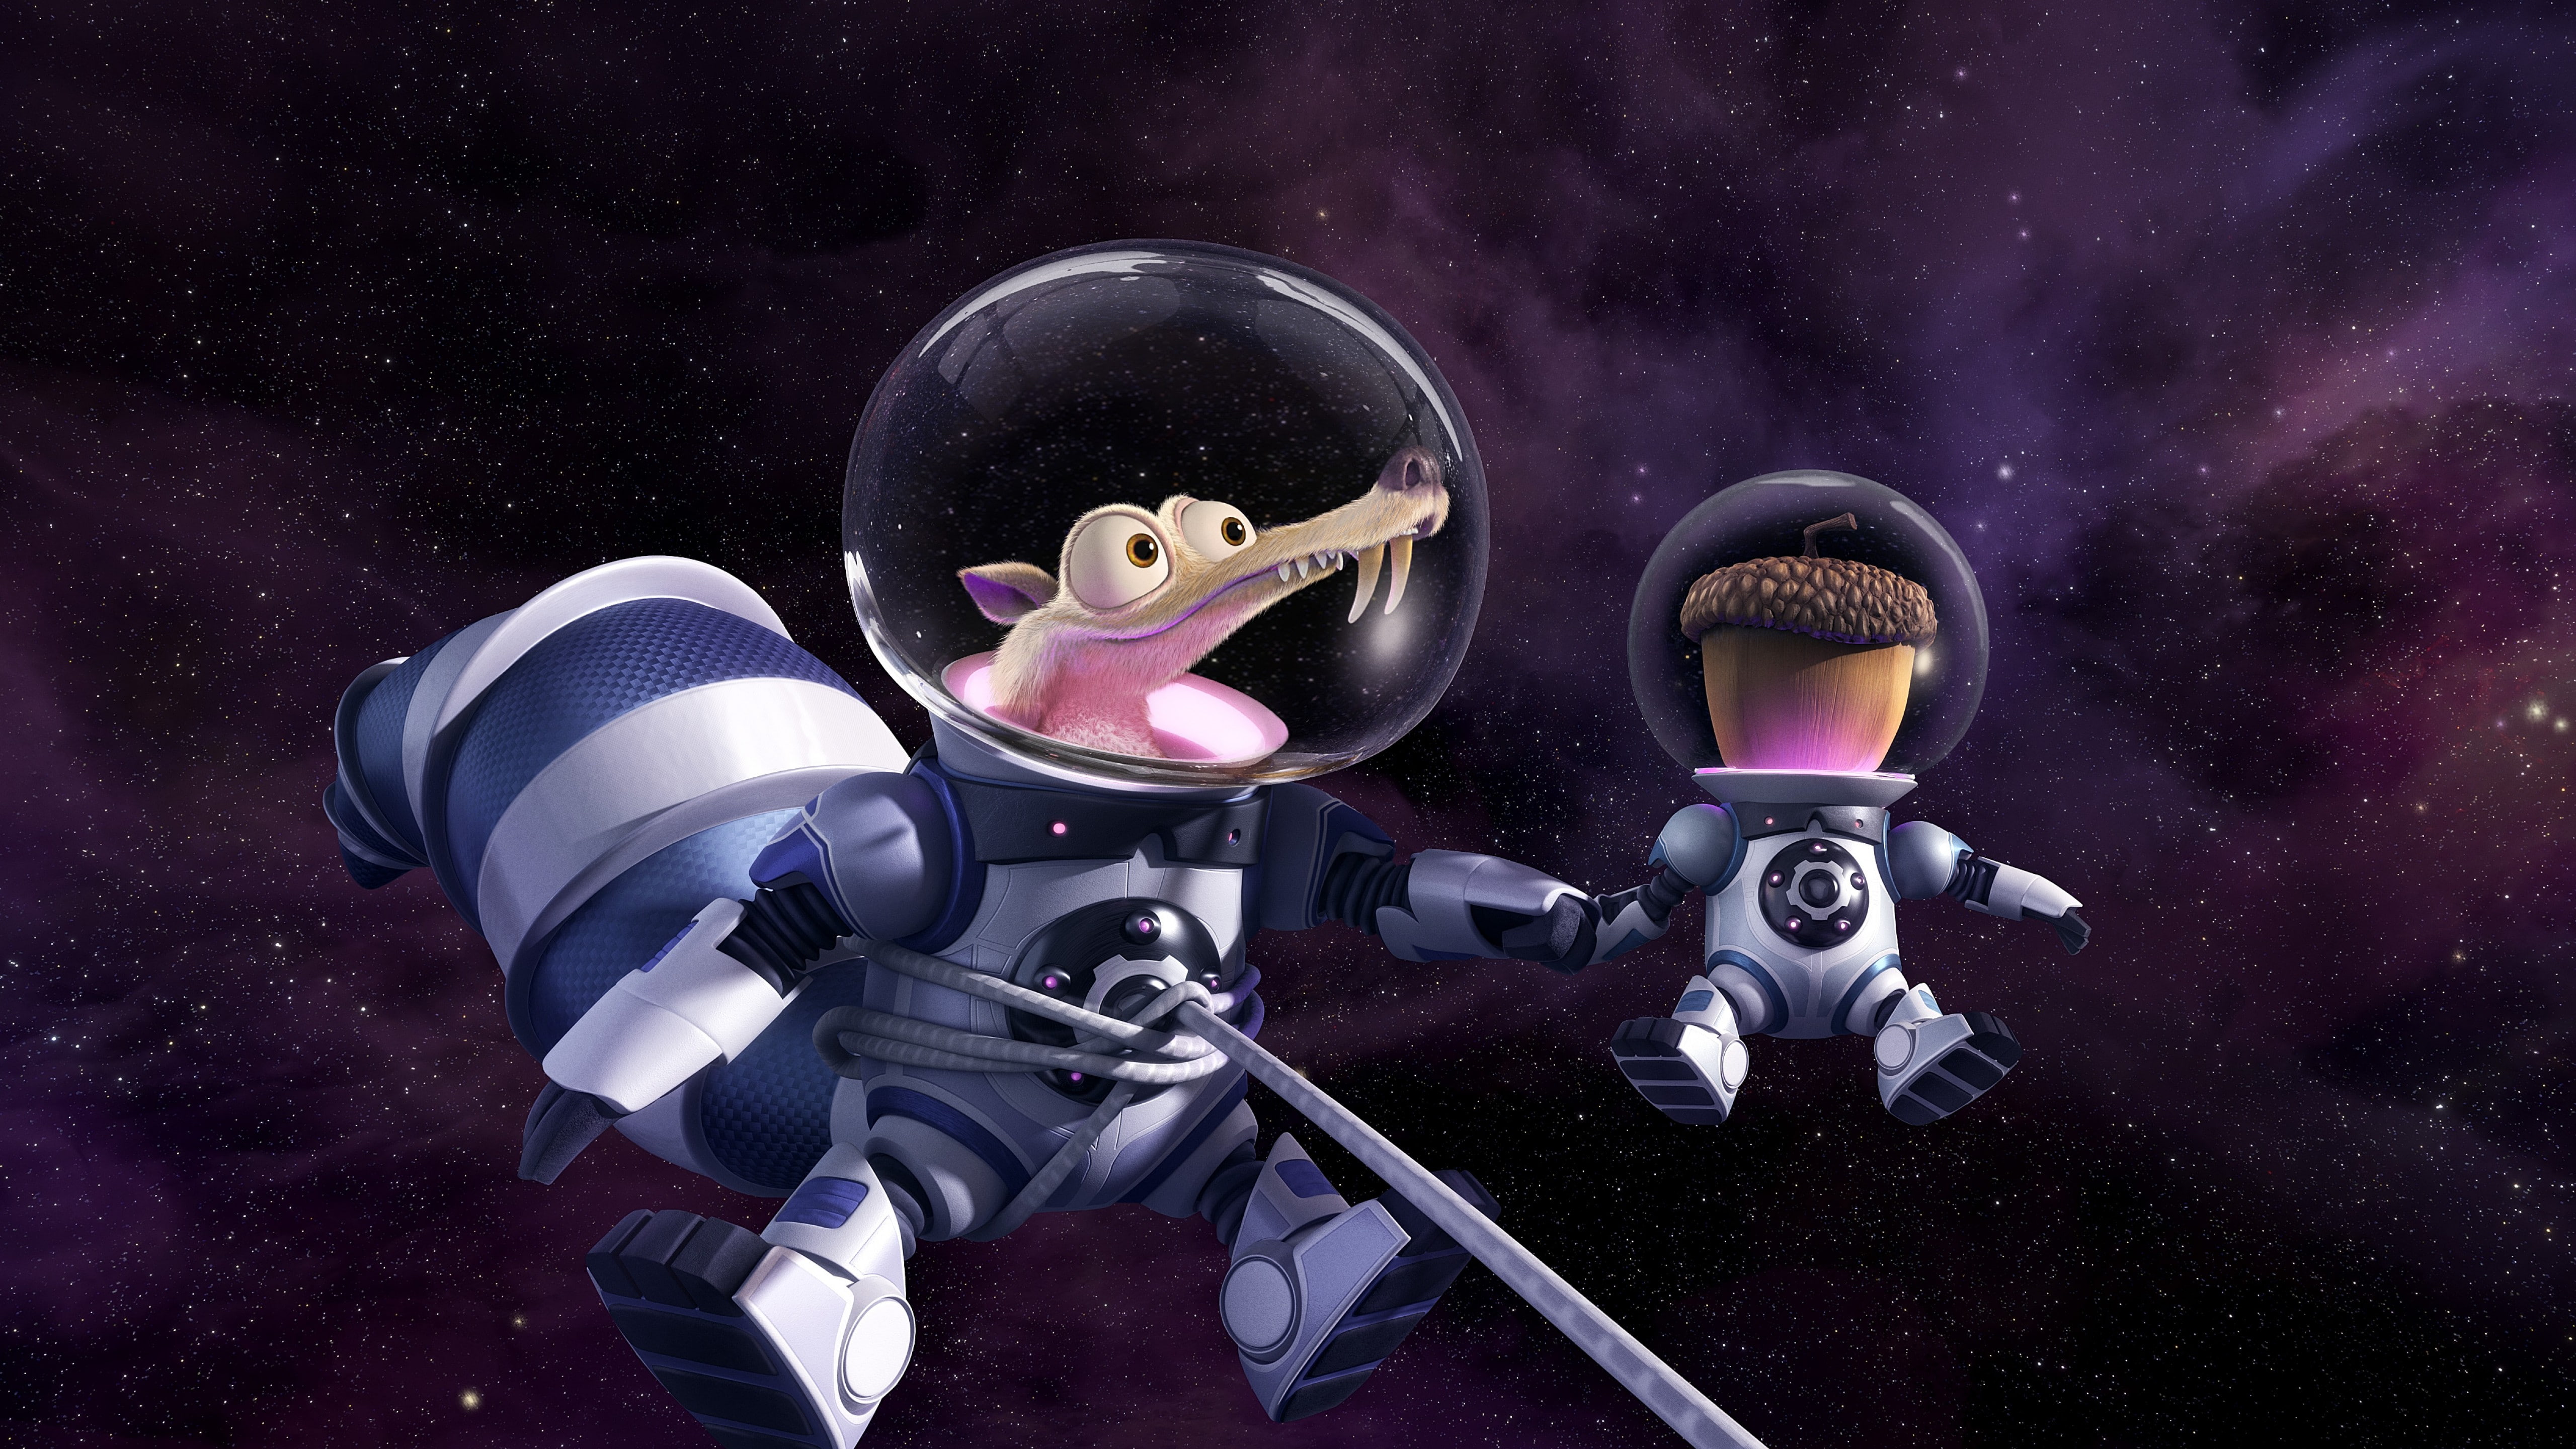 ice age scrat wearing astronaut suit, Ice Age 5: Collision Course